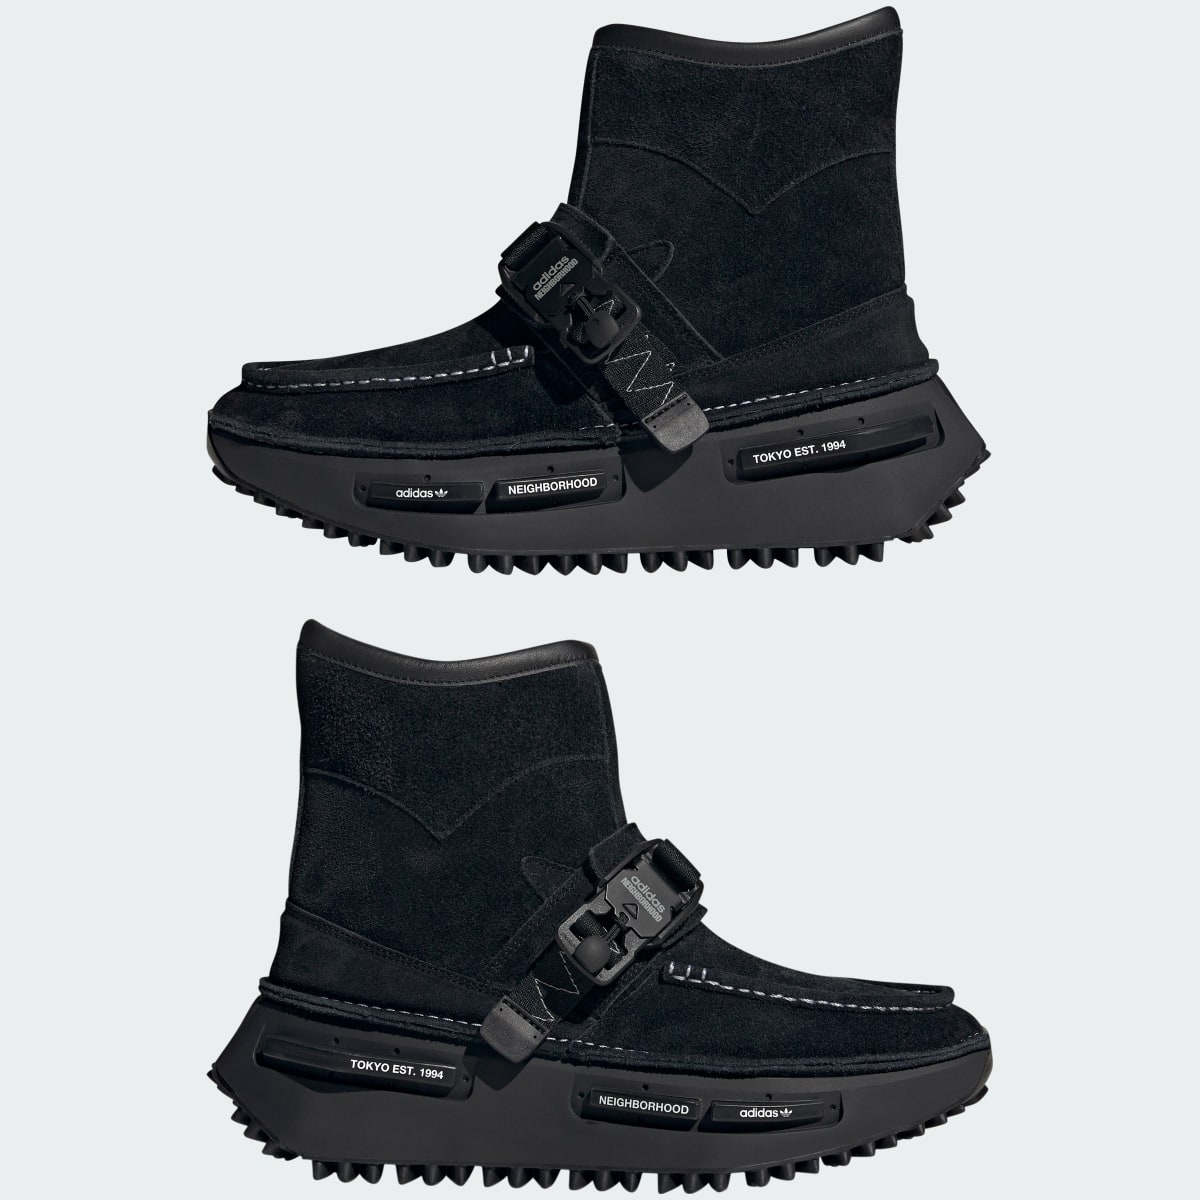 Adidas NMD_S1 N BOOTS. 9